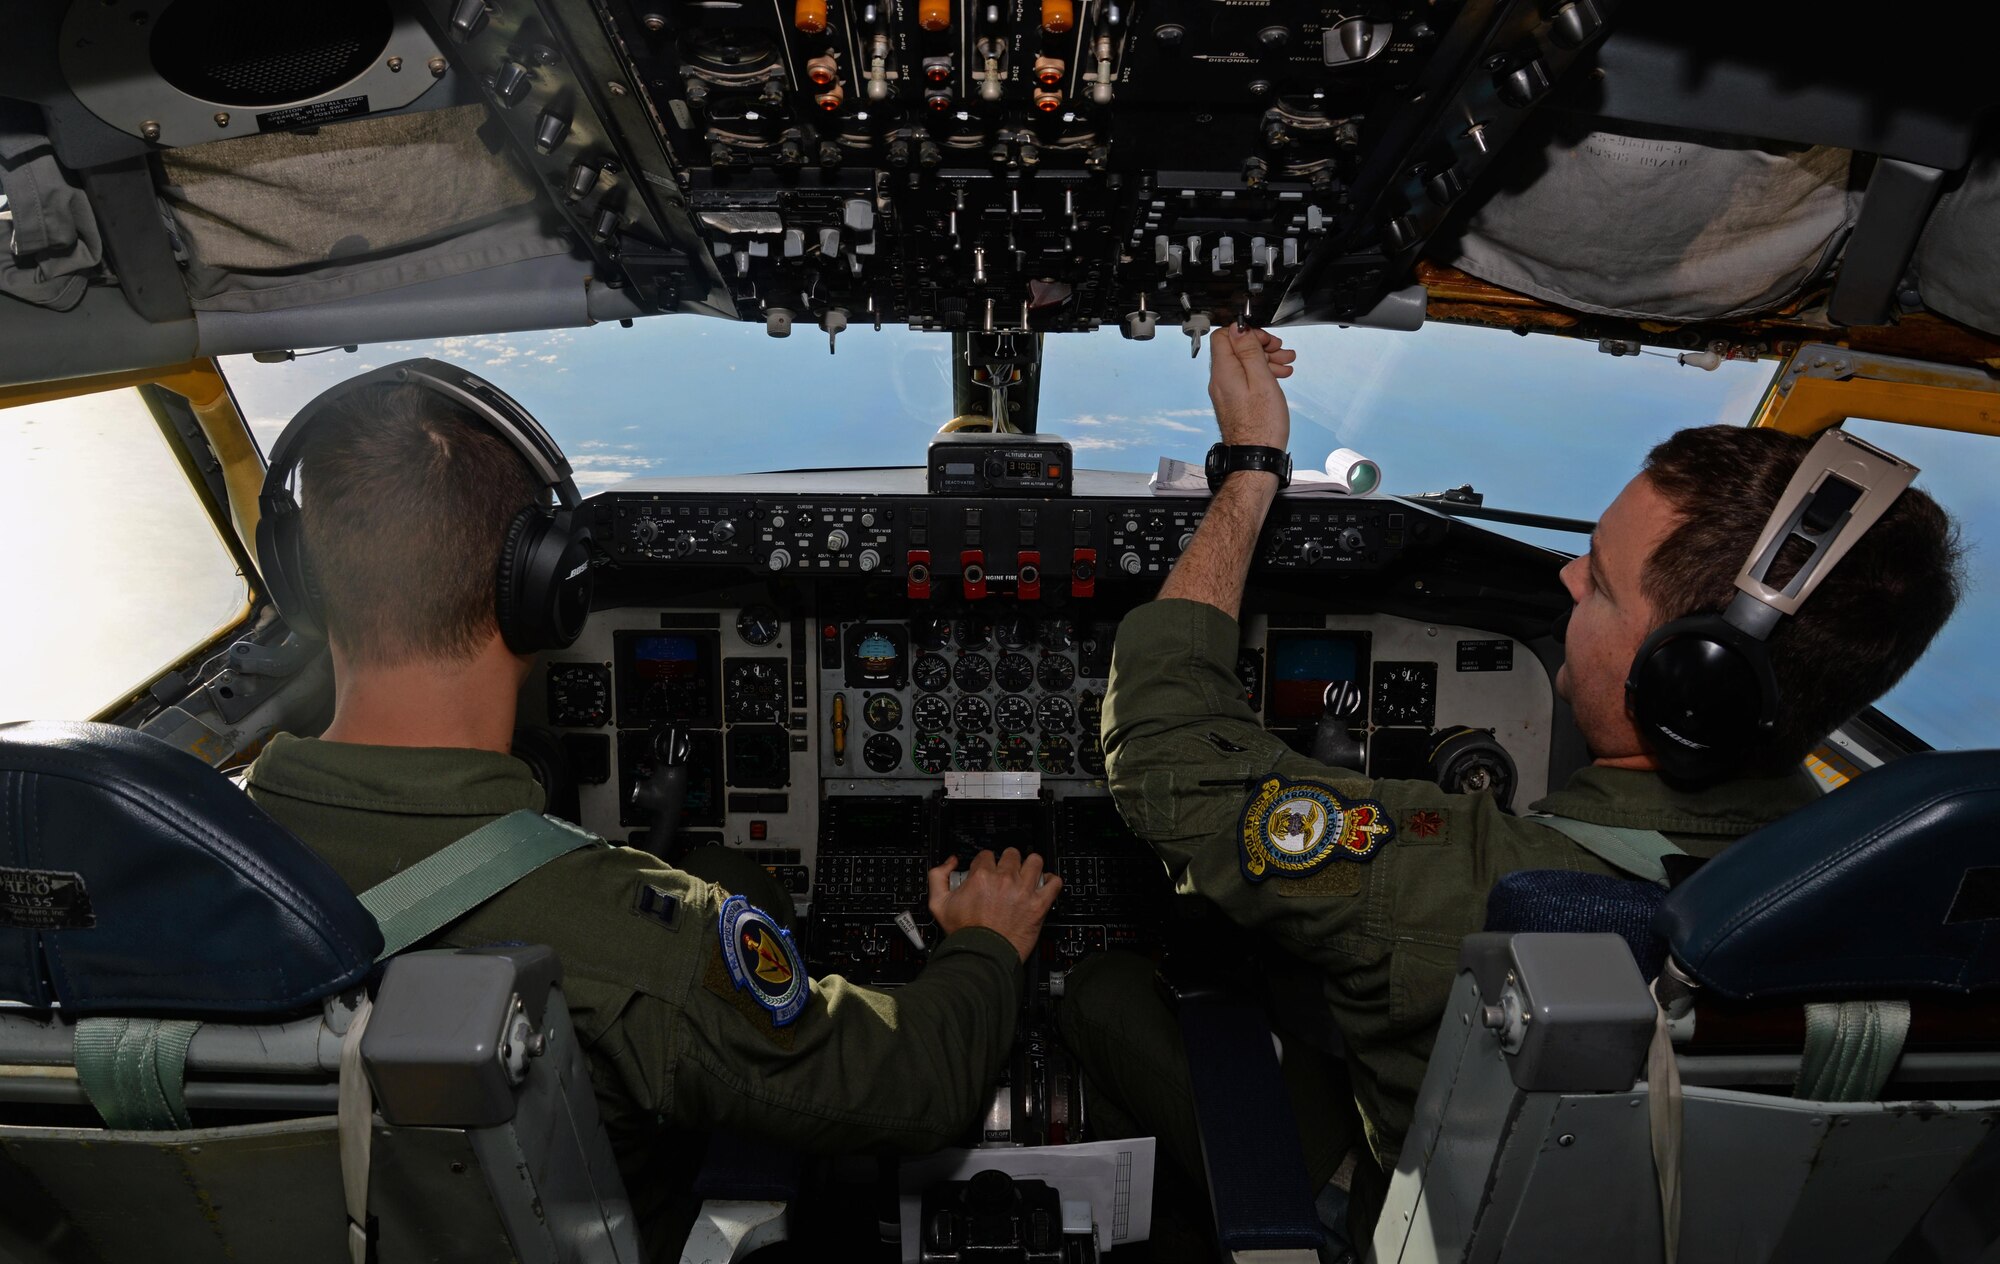 Capt. RJ Allen, a 351st Air Refueling Squadron pilot, and Maj. Joseph Smith, a 351st ARS instructor pilot, fly to Son San Juan Air Base, Spain, for exercise Trident Juncture Oct. 20, 2015. The exercise will primarily be conducted in Spain, Portugal and Italy with additional activities in Belgium, Canada, Germany, the Netherlands, Norway and at sea in the Atlantic Ocean and Mediterranean Sea. (U.S. Air Force photo/Senior Airman Christine Halan)